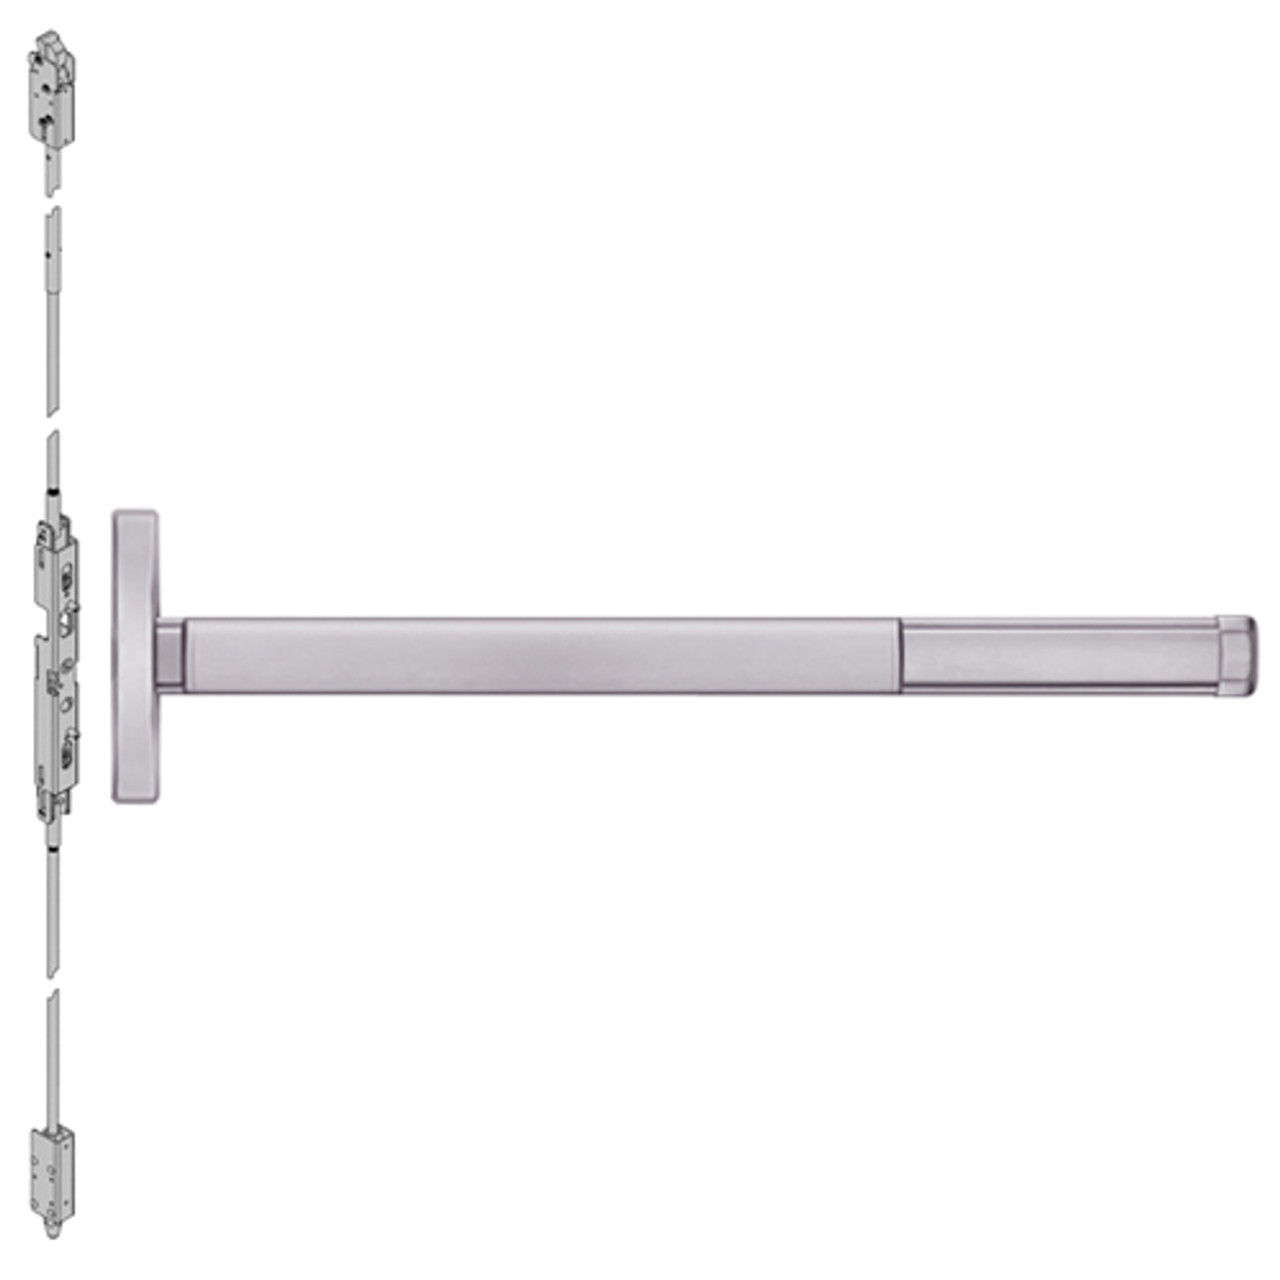 2602LBRCD-630-48 PHI 2600 Series Non Fire Rated Concealed Vertical Rod Exit Device Prepped for Dummy Trim with Cylinder Dogging and LBR in Satin Stainless Steel Finish